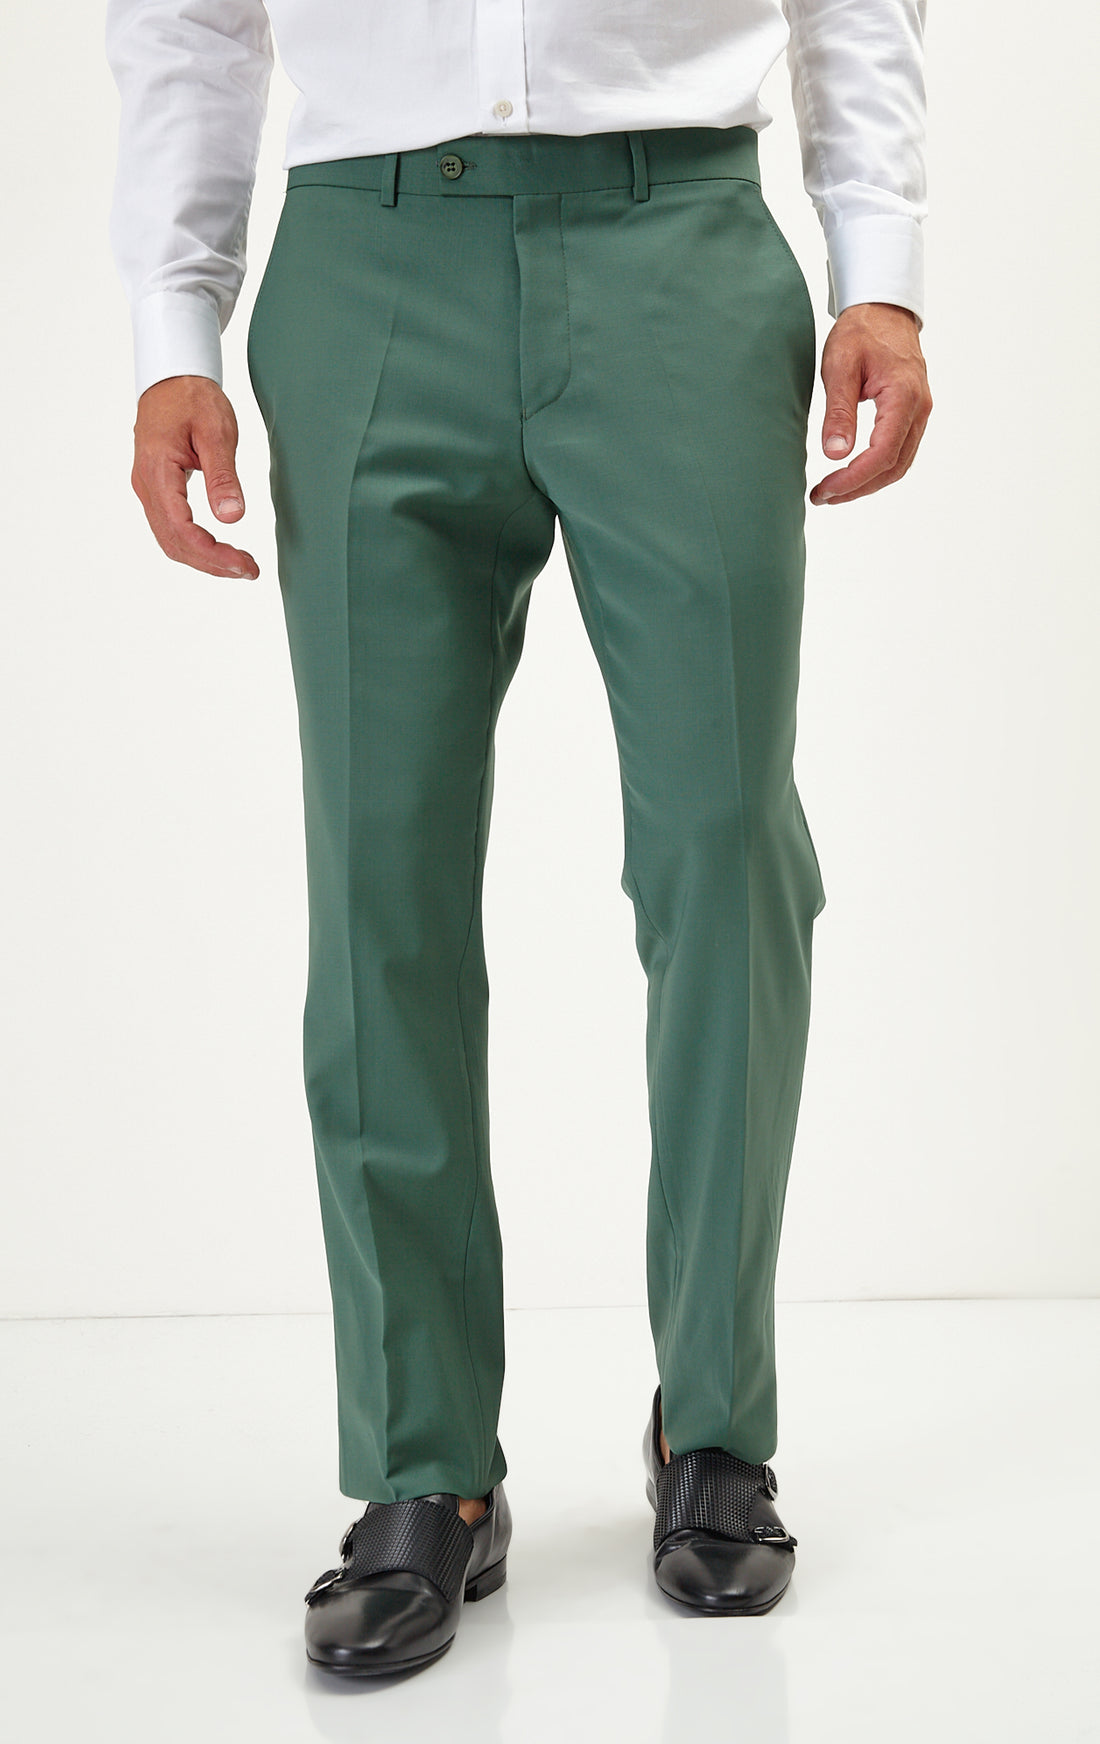 N° R206 Double Breasted Merino Wool Suit - Verdant Green - Ron Tomson